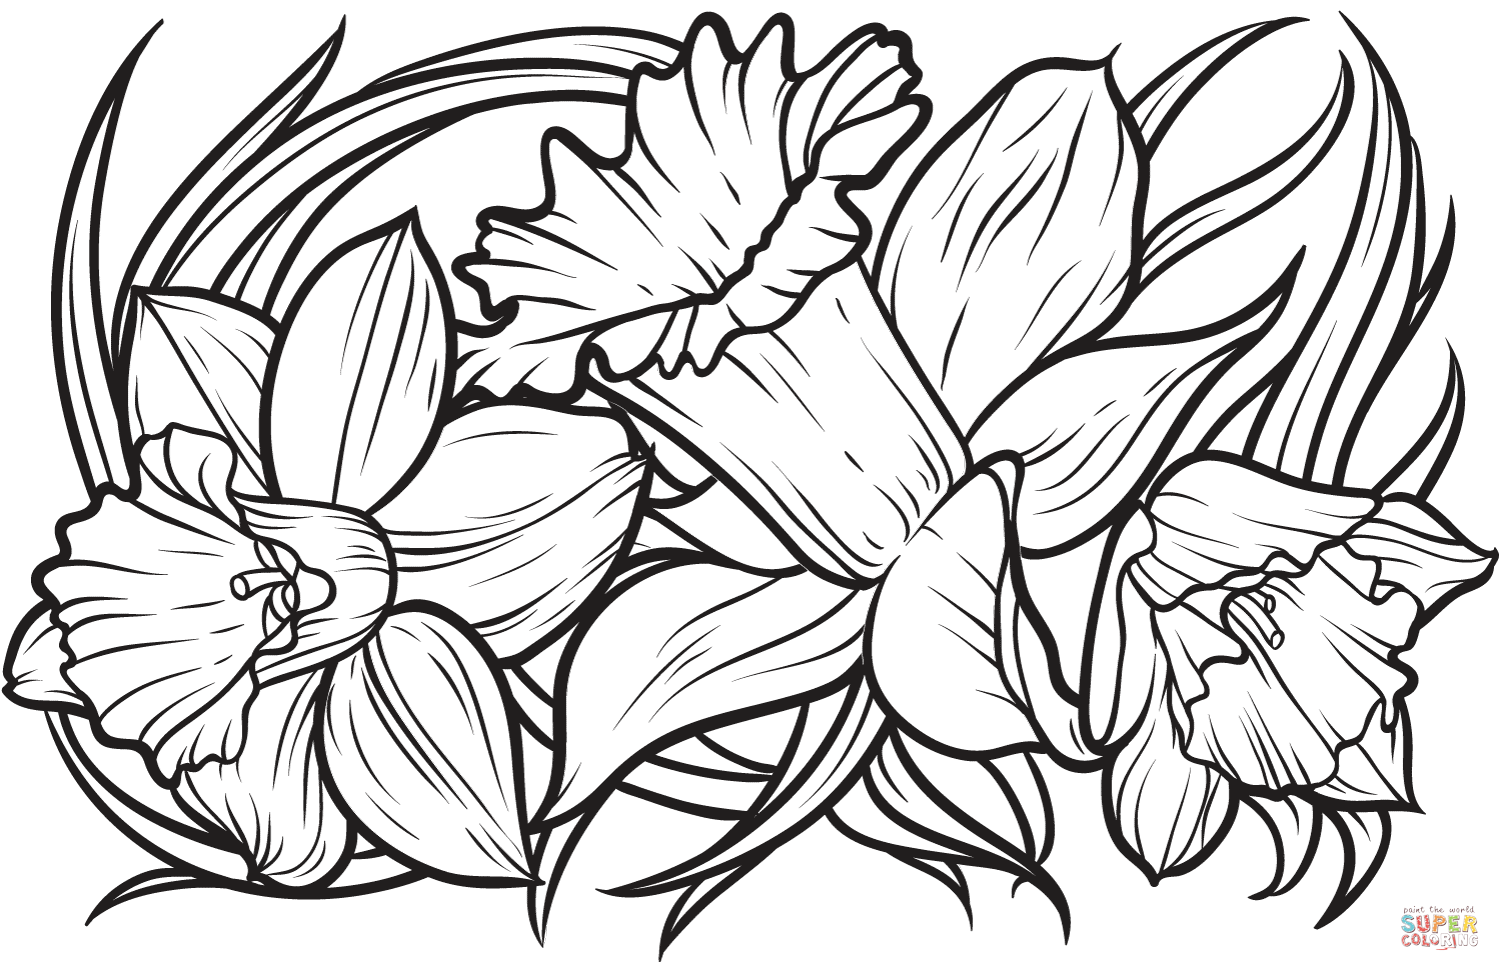 Daffodil coloring page free printable coloring pages easy coloring pages adult coloring pages free printable coloring pages